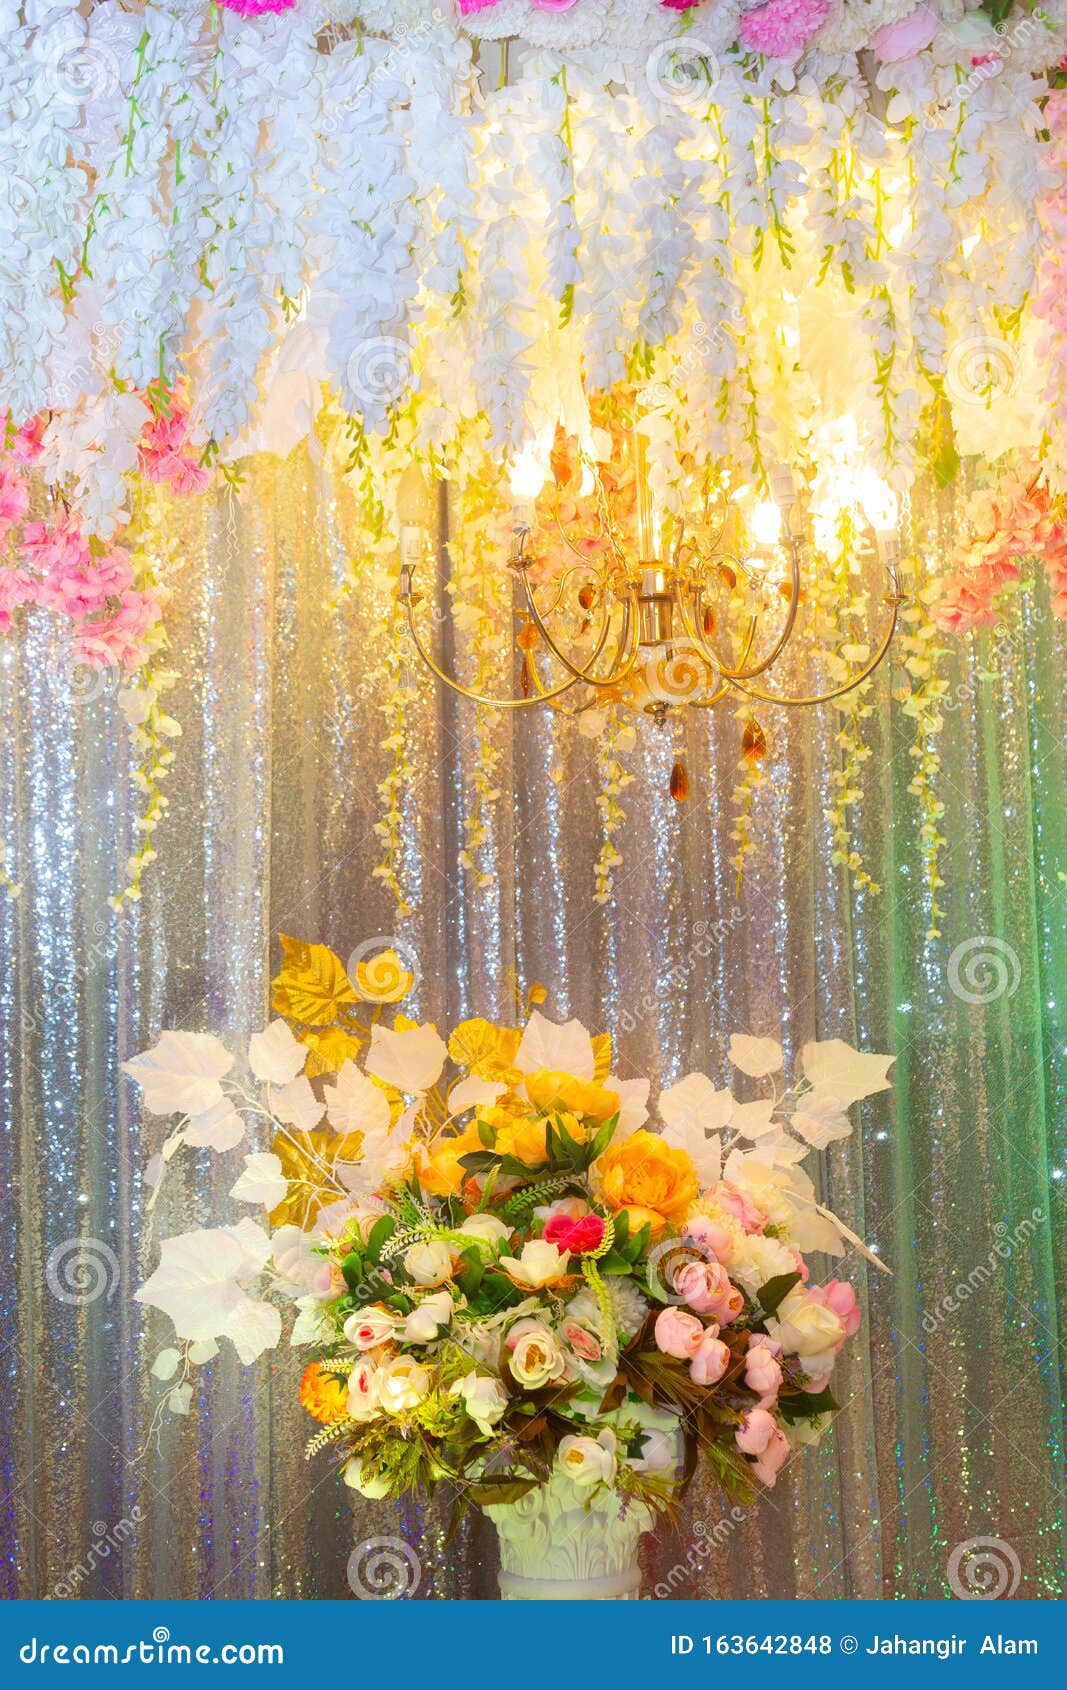 Wedding Stage Decoration with Artificial Colorful Flower Stock Image -  Image of banquet, hanging: 193160007